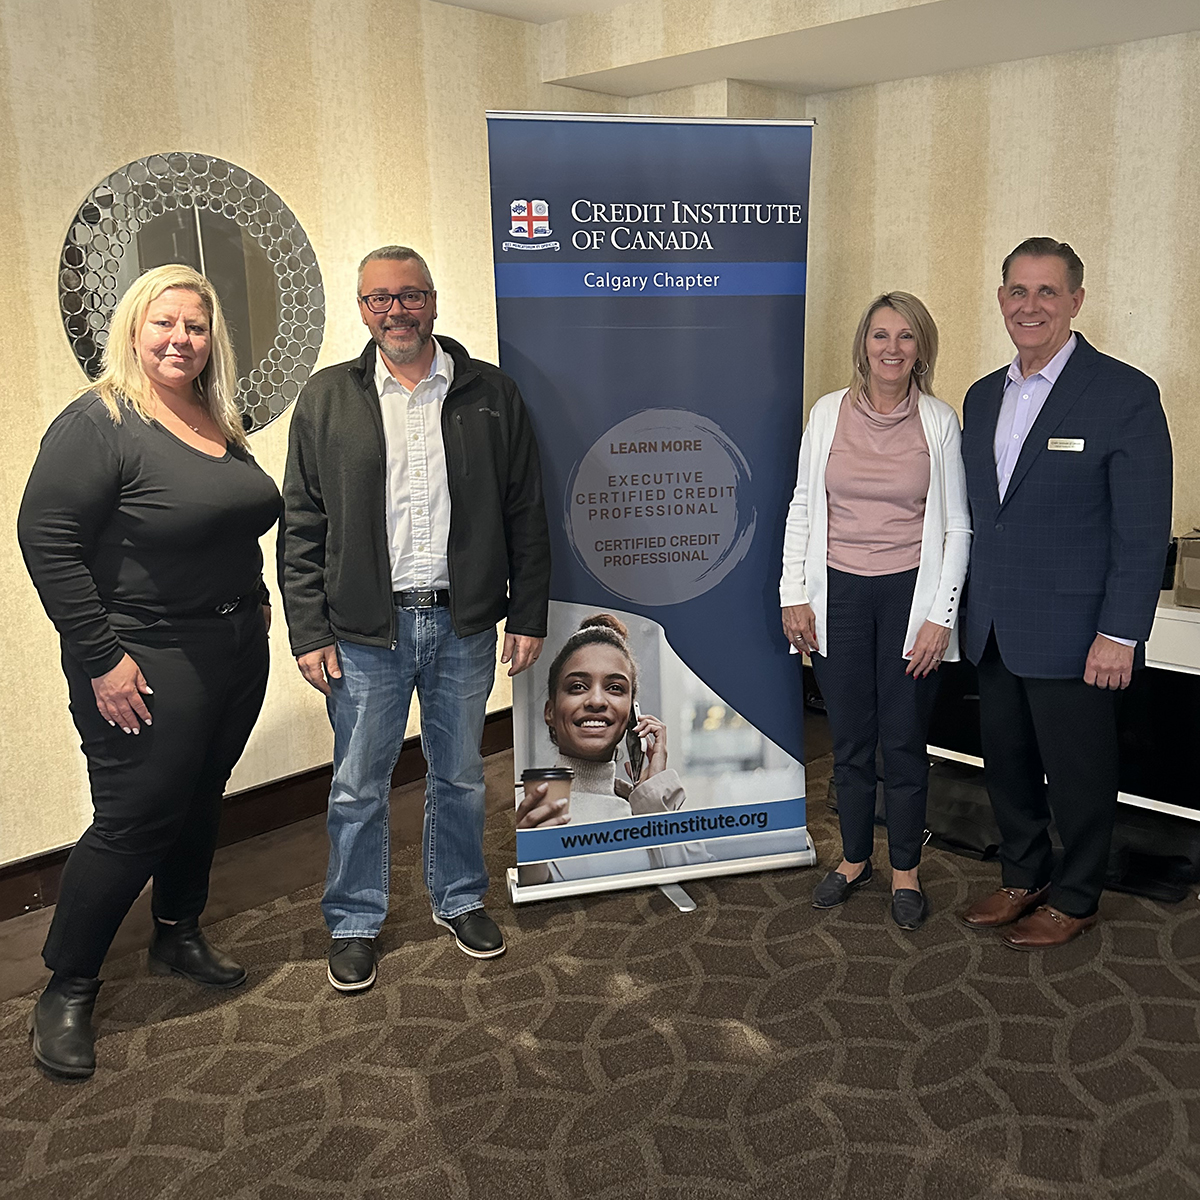 MetCredit's @dhopkyns (right) at last night's Credit Institute of Canada Calgary Chapter AGM with Jodie, Jason and Mary Mason Hummel. #creditmanagement #creditprofessionals #canadabusiness #Calgary